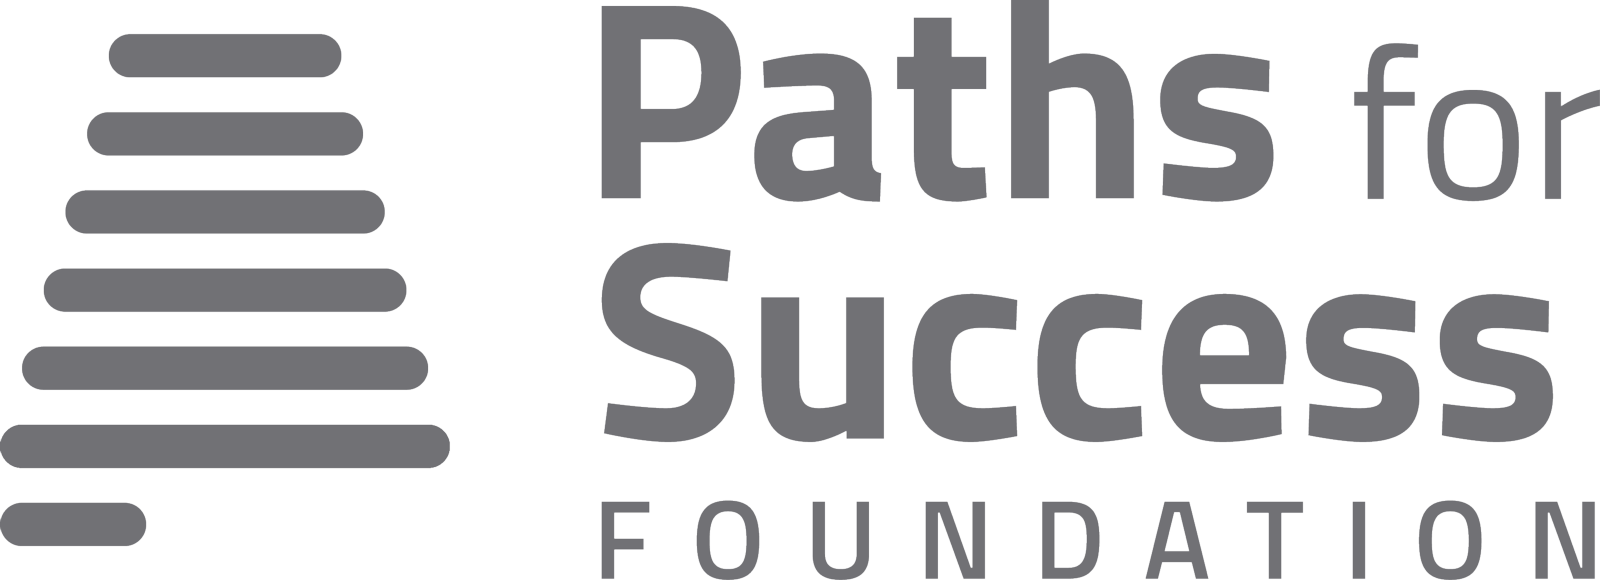 Paths for Success Foundation logo